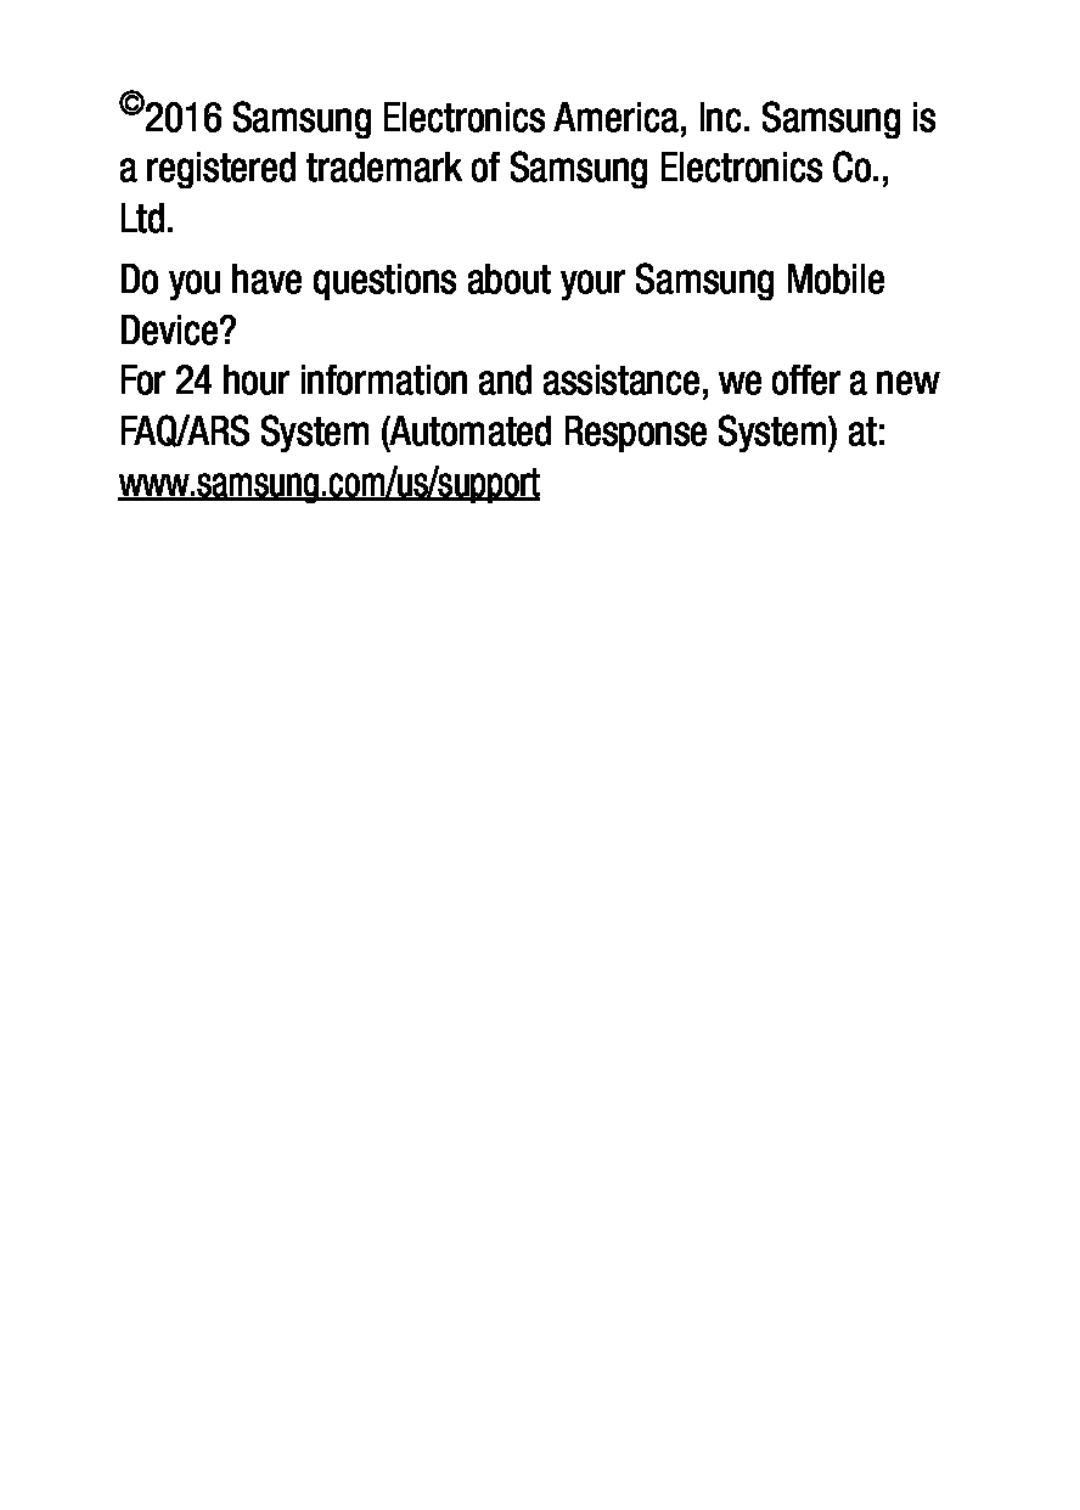 Do you have questions about your Samsung Mobile Device Galaxy Tab S2 9.7 US Cellular